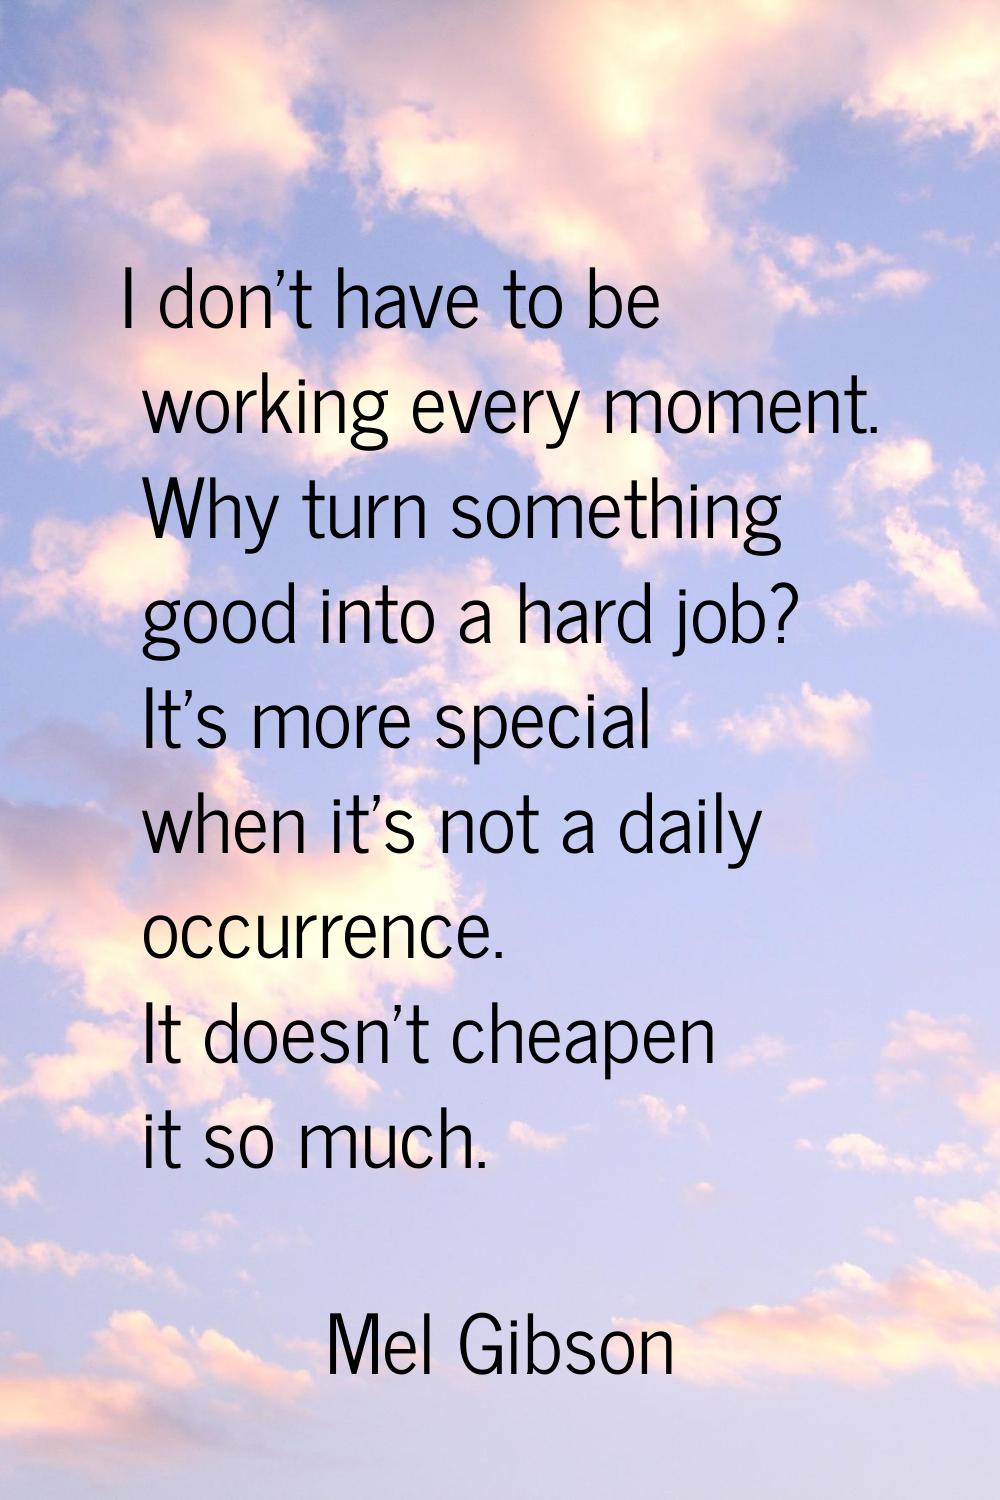 I don't have to be working every moment. Why turn something good into a hard job? It's more special